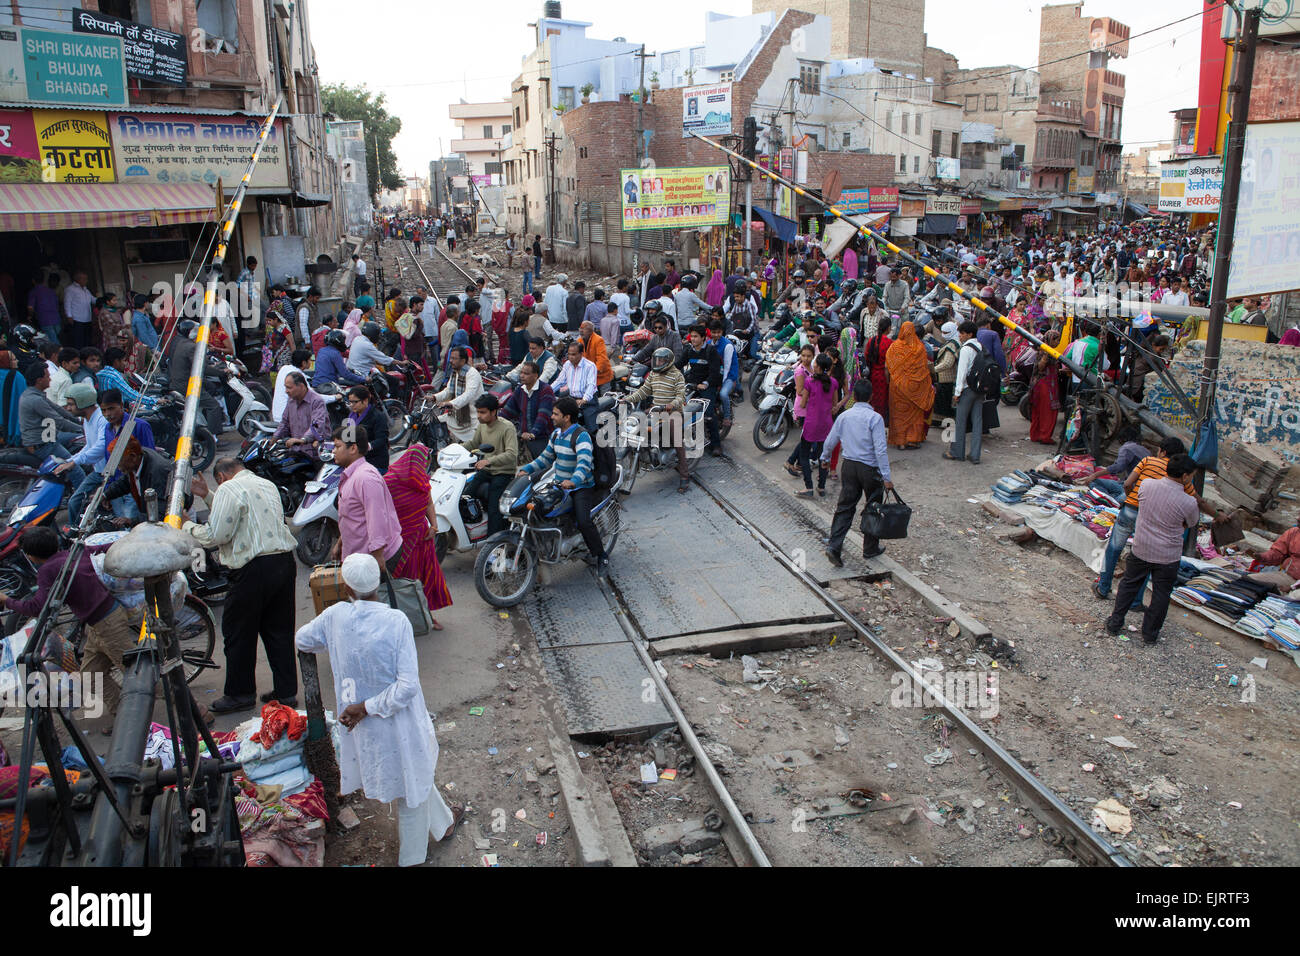 Congestion at a railway crossing in Bikaner Stock Photo